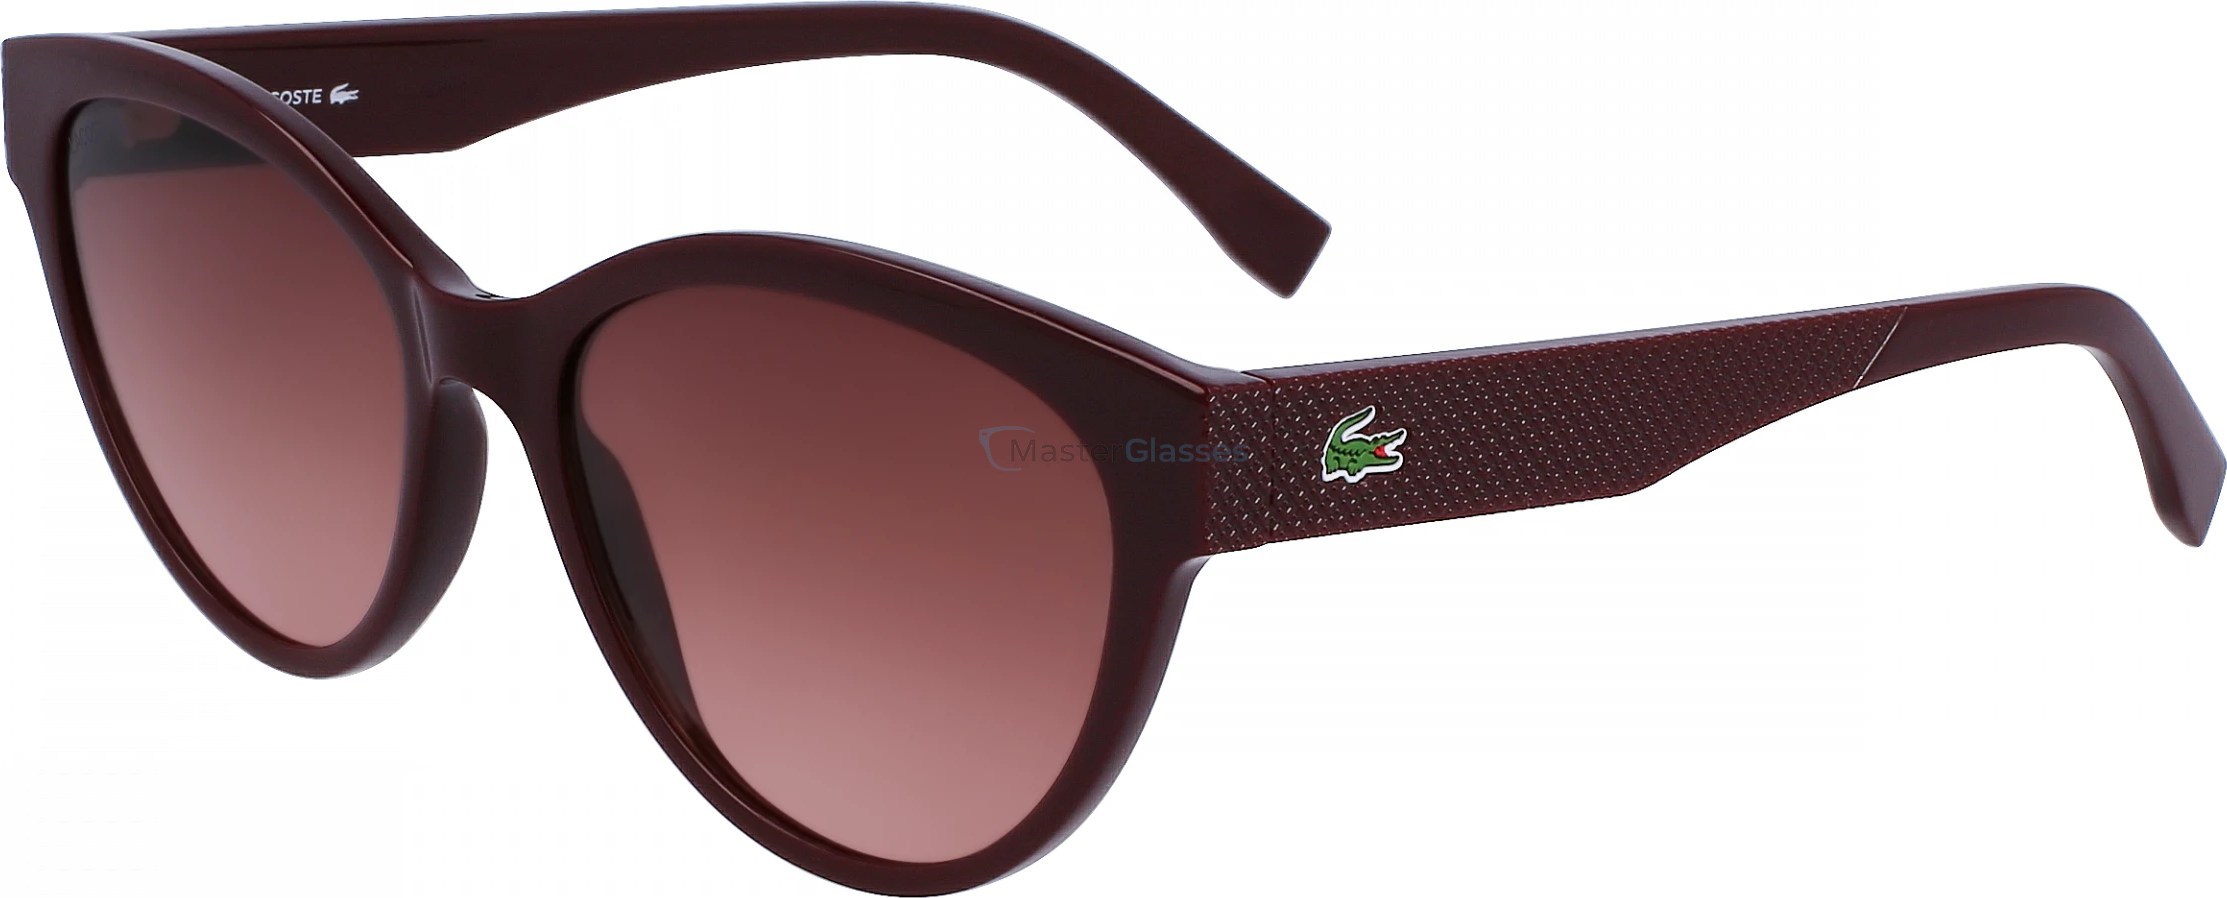   LACOSTE L983S 601,  BURGUNDY, BROWN